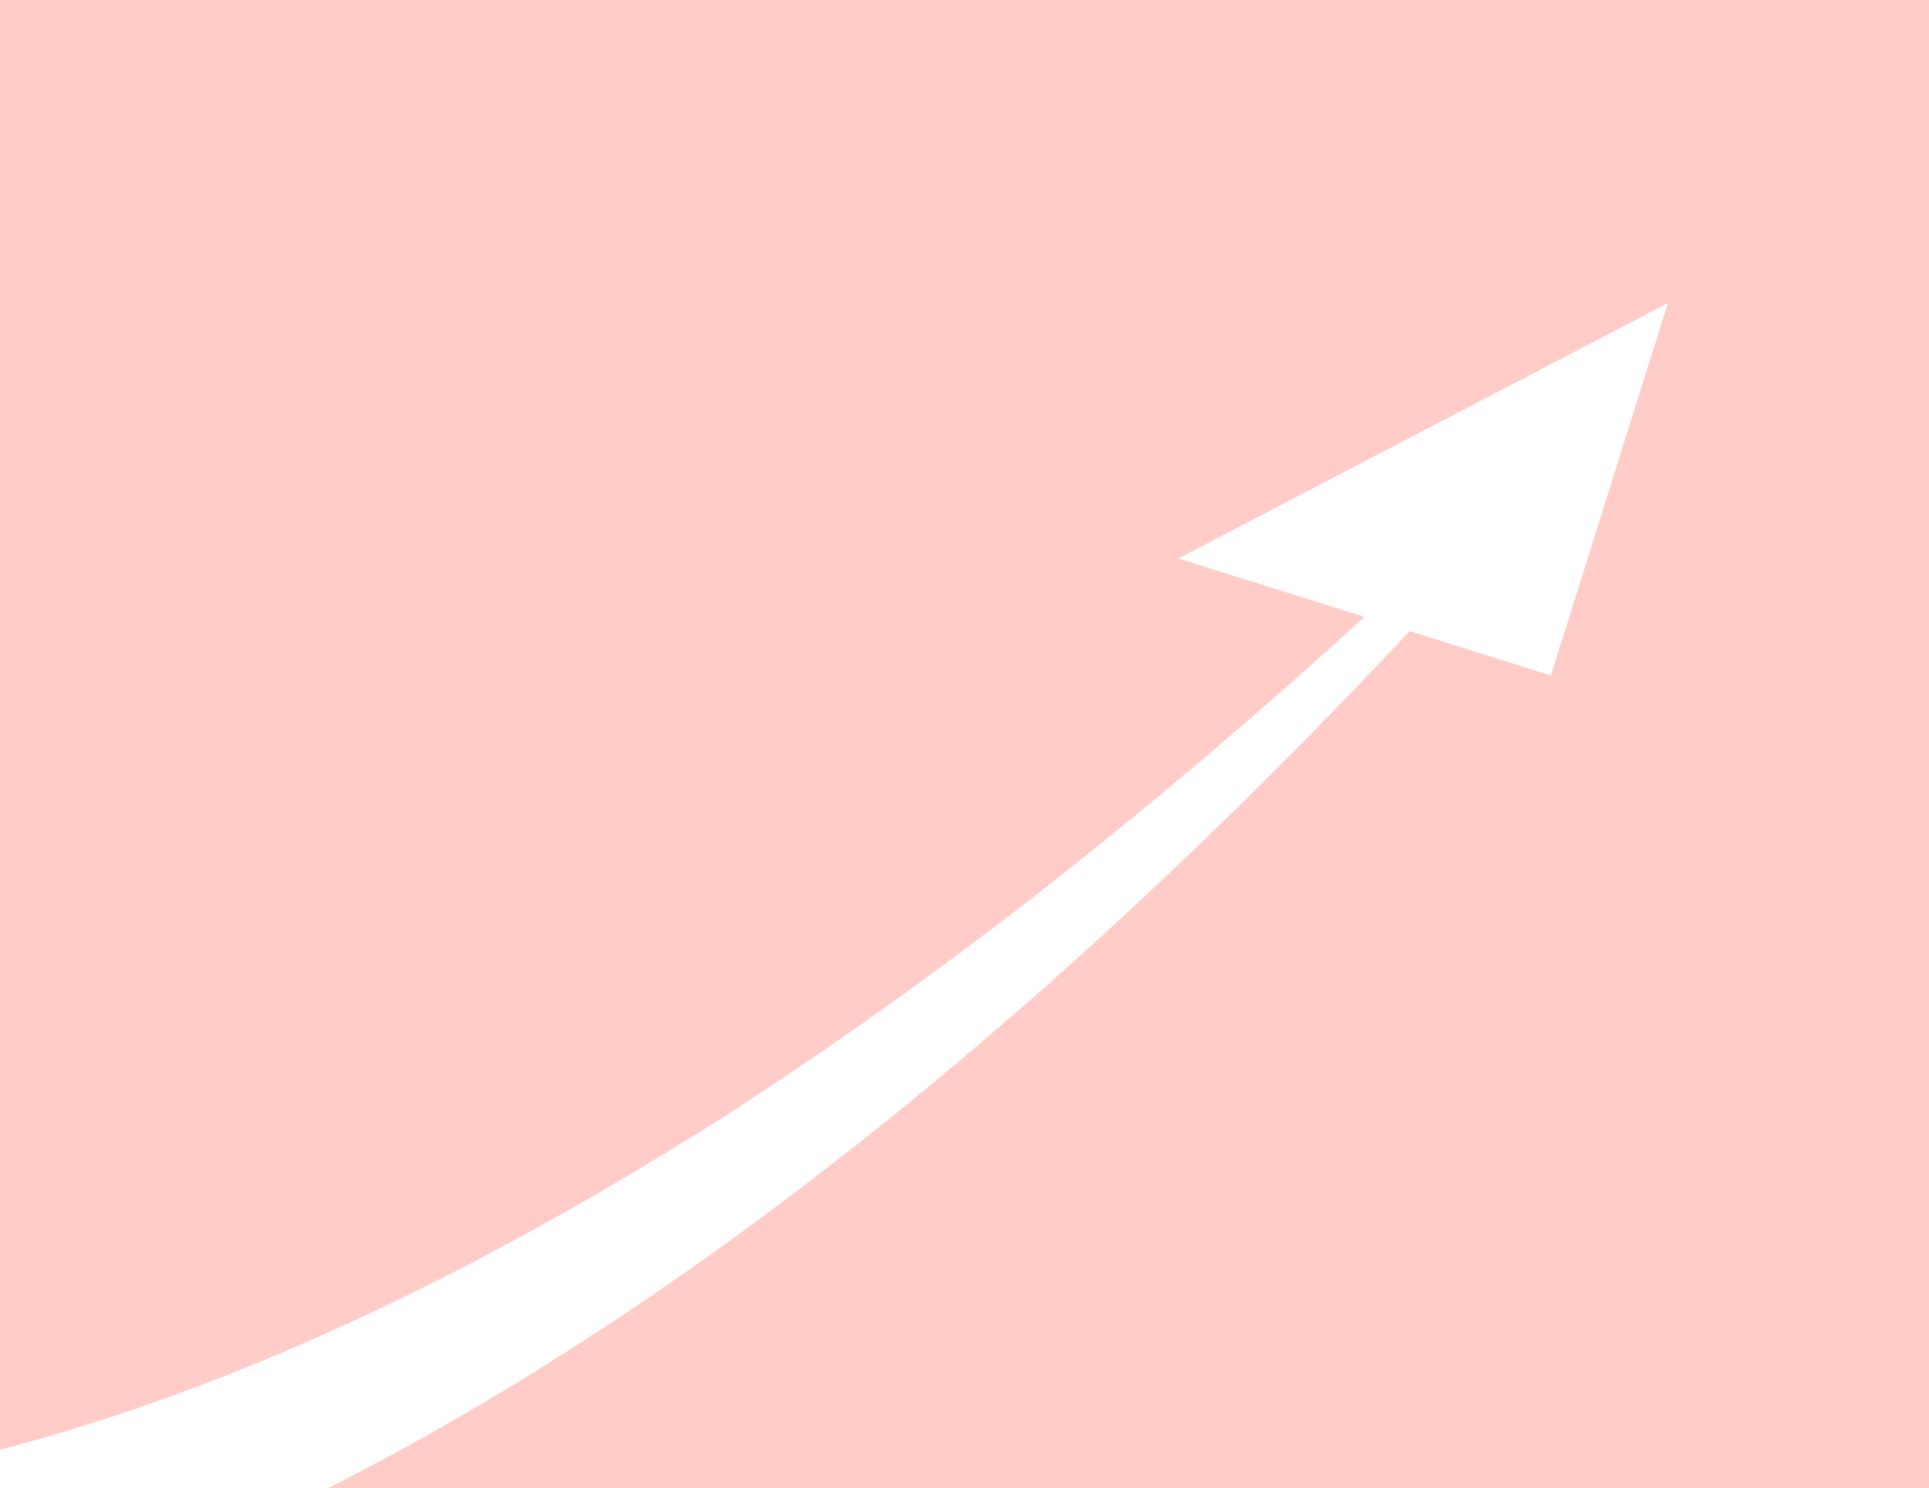 Image of a white arrow on a pink background